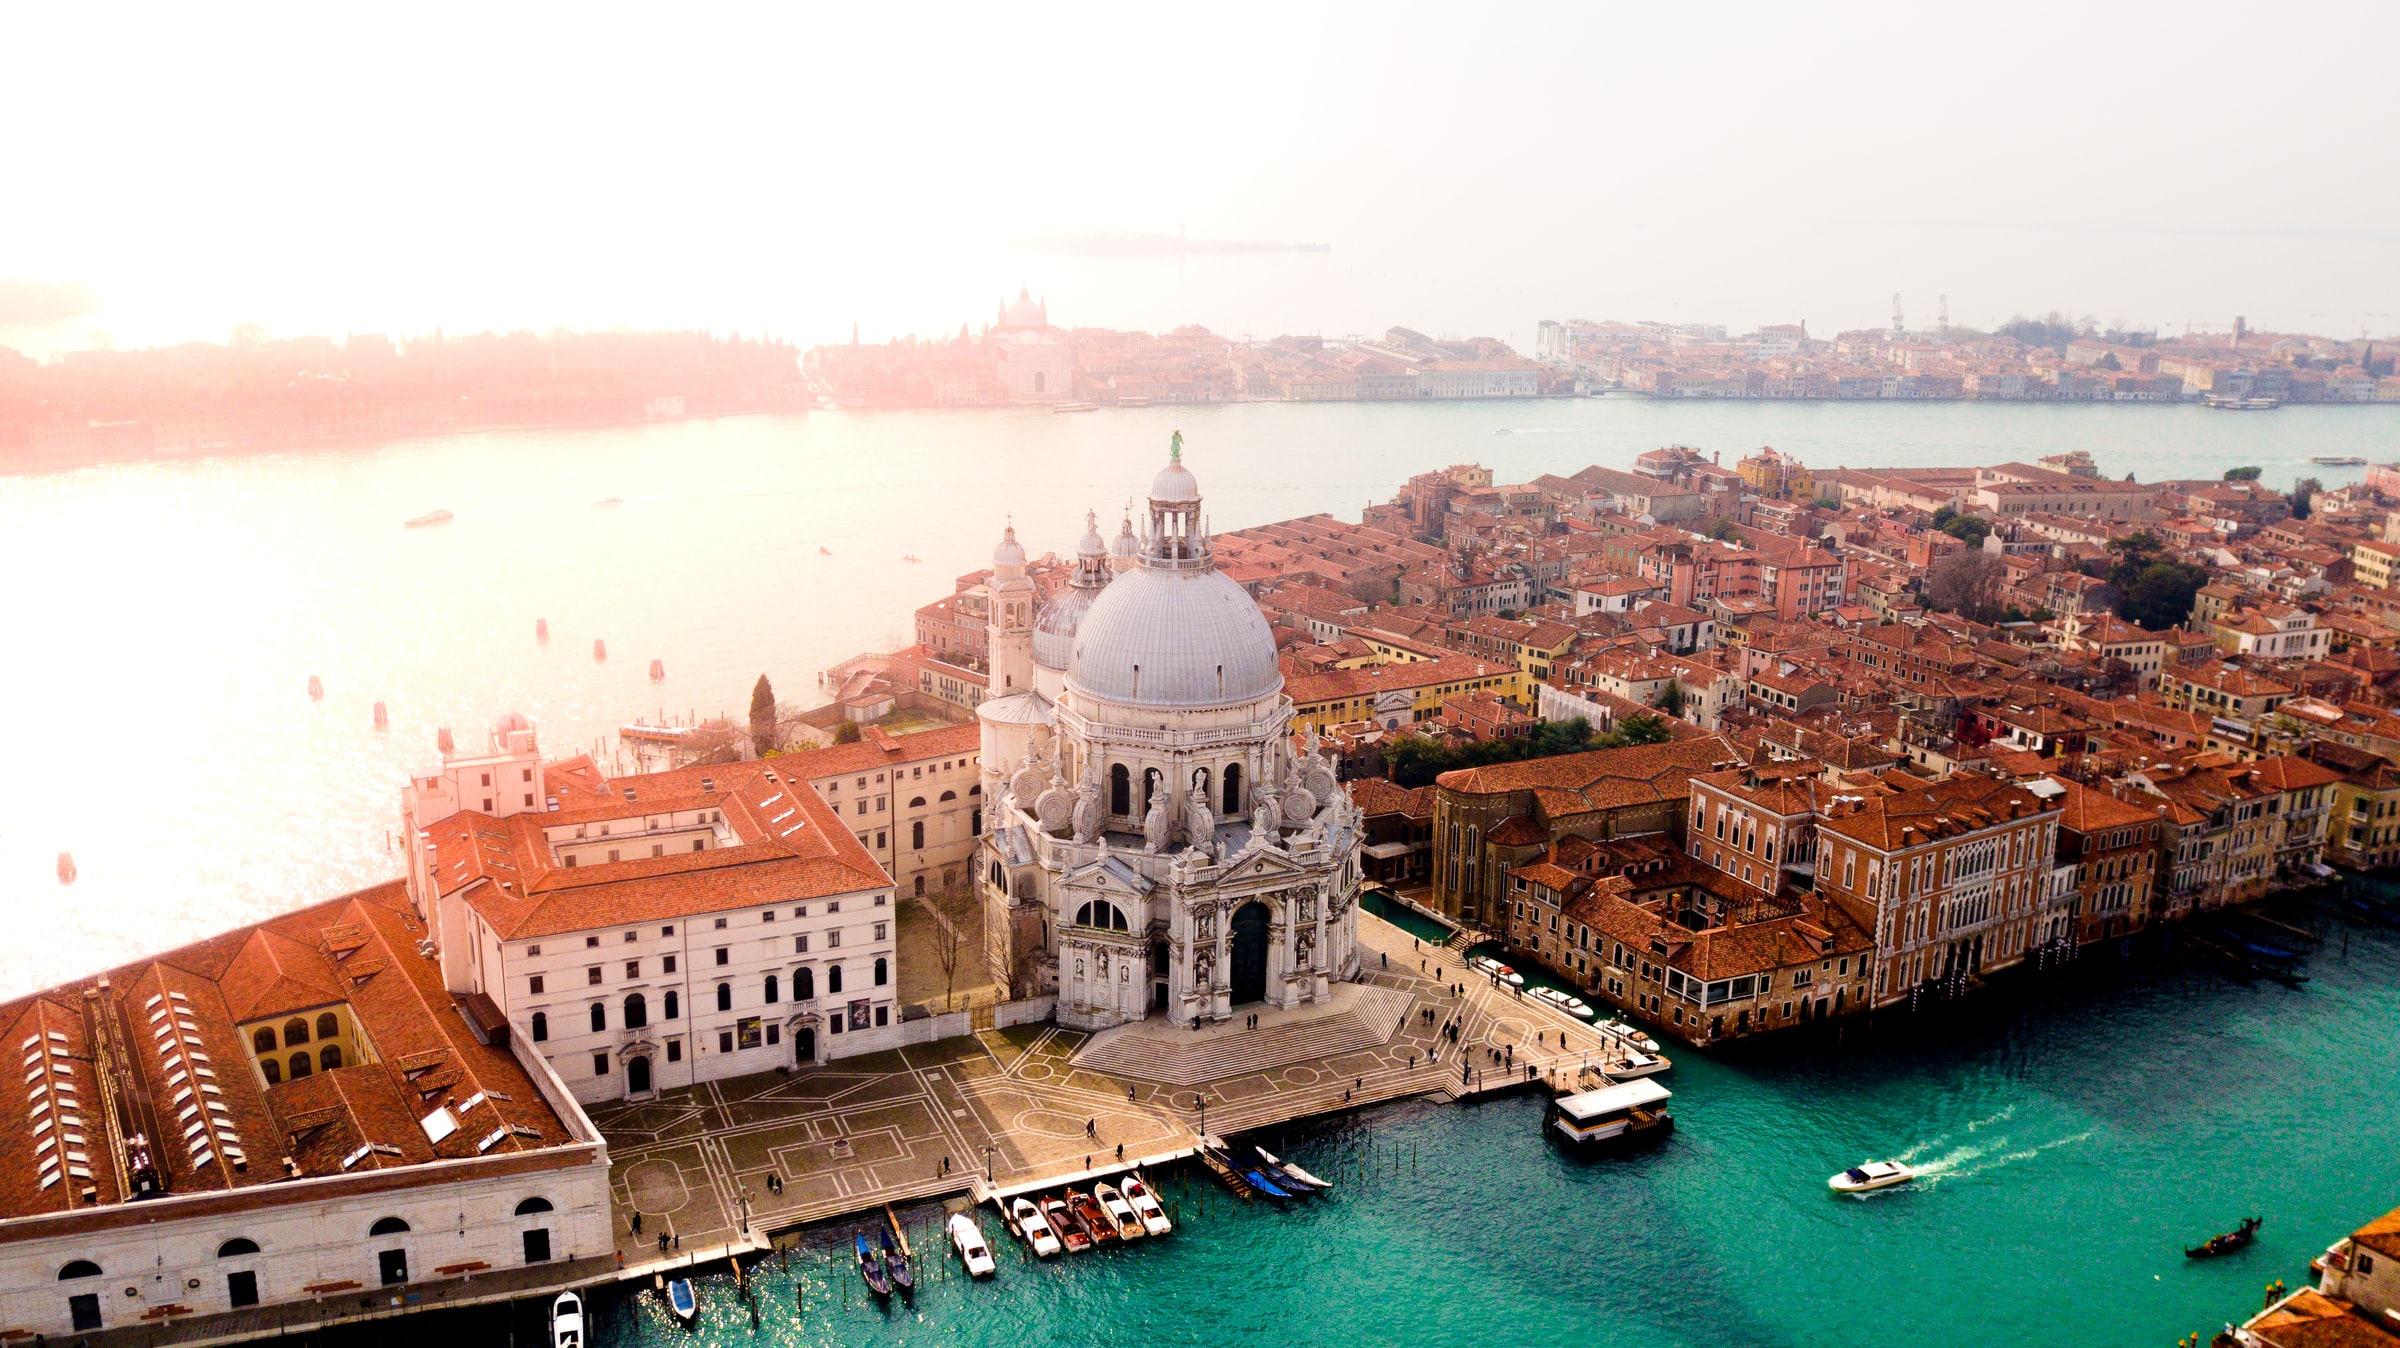 Sea level rise: SAVEMEDCOASTS-2 researchers meet stakeholders and schools in Venice